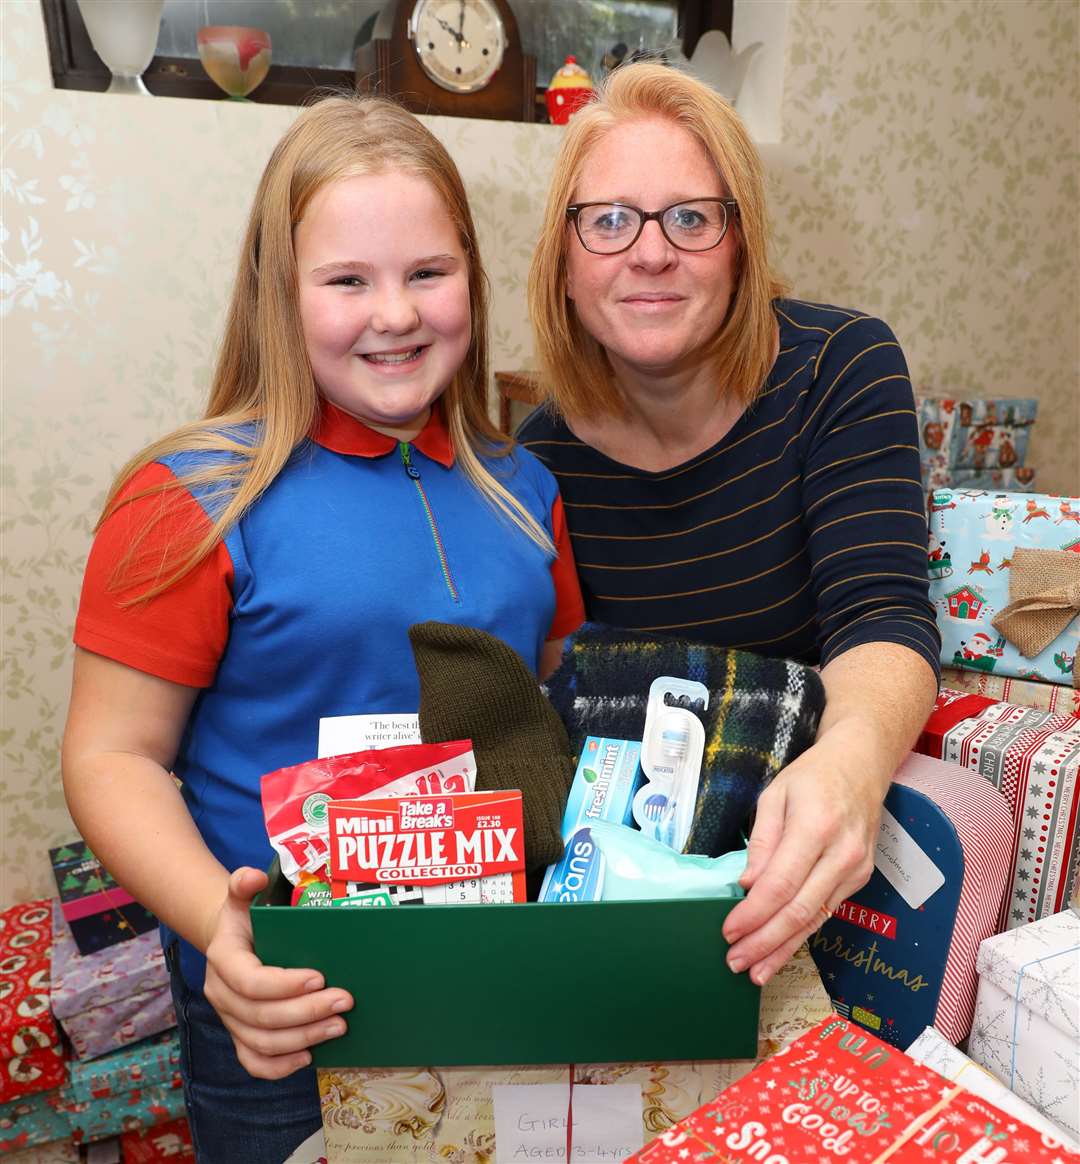 Fifi and Sarah Coccia usually collect giftboxes for charities at Christmas, but have had to change their plans